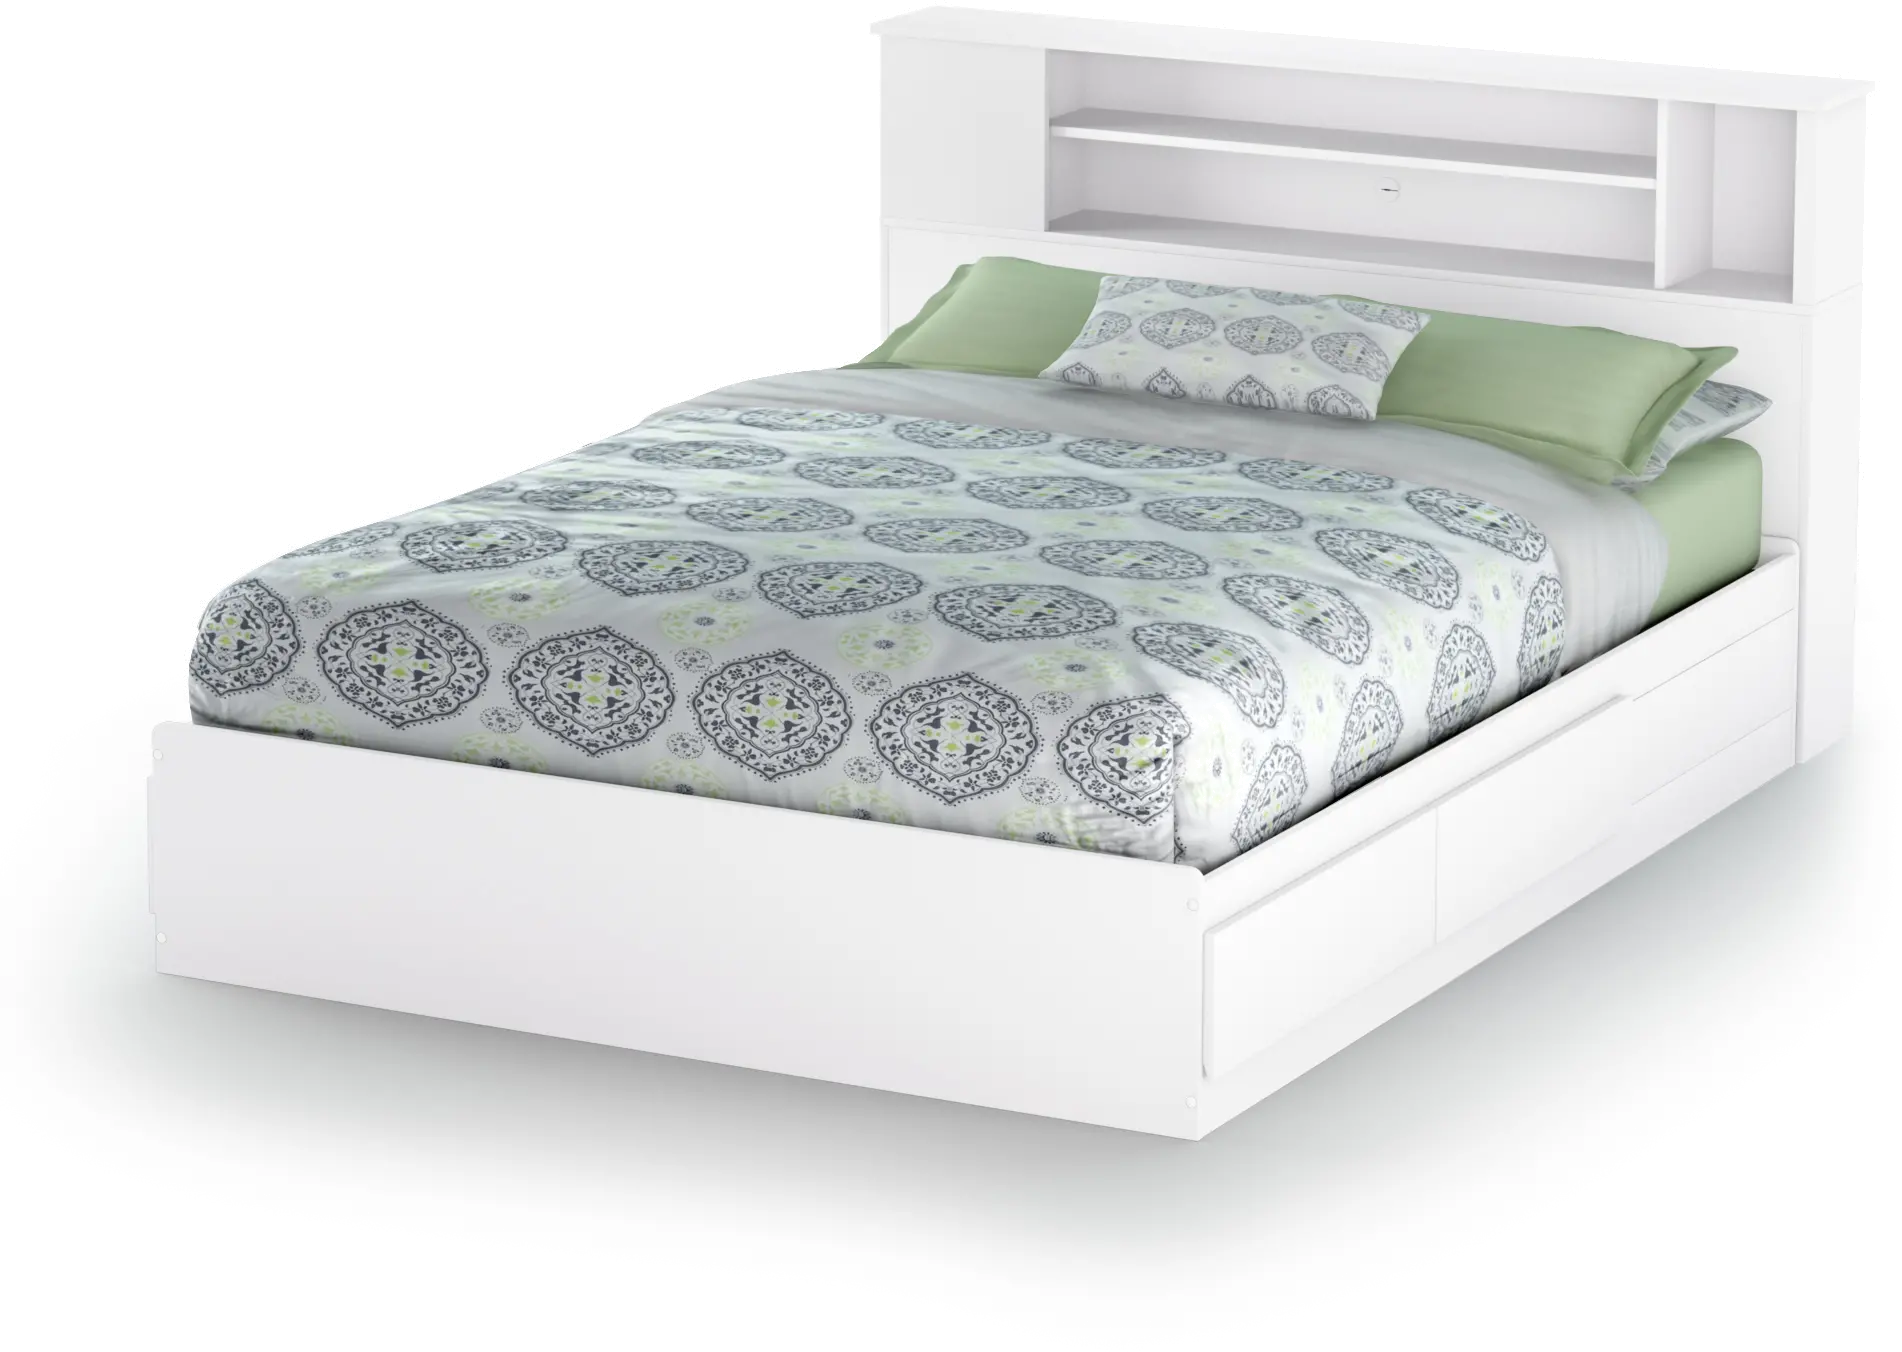 Vito White Queen Mates Bed with Bookcase Headboard - South Shore